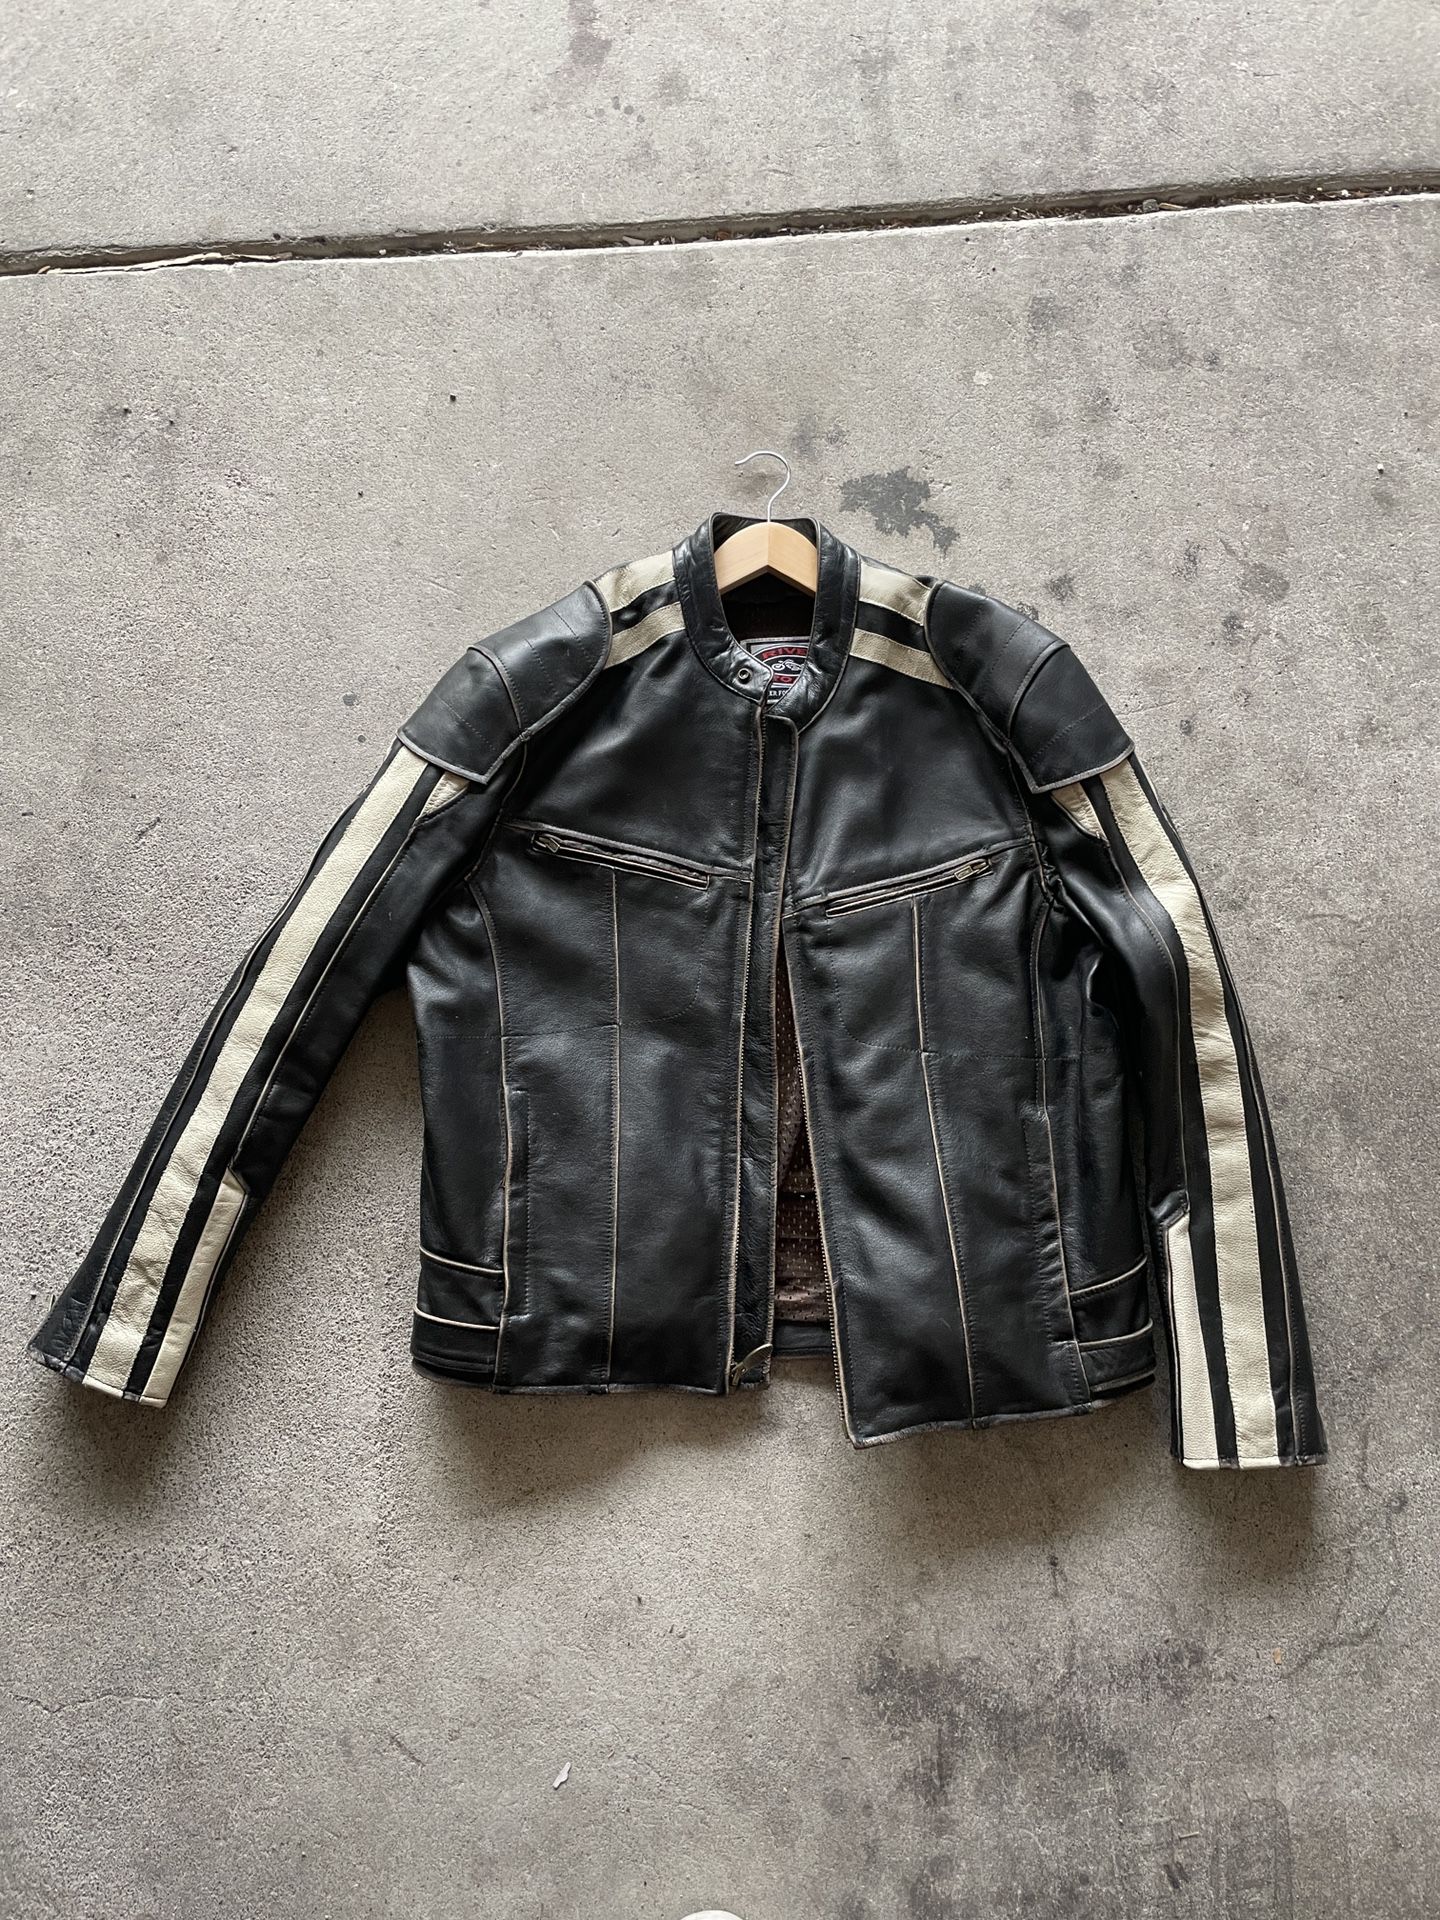 River Road Motorcycle Jacket Size 46 With Zip In Lining